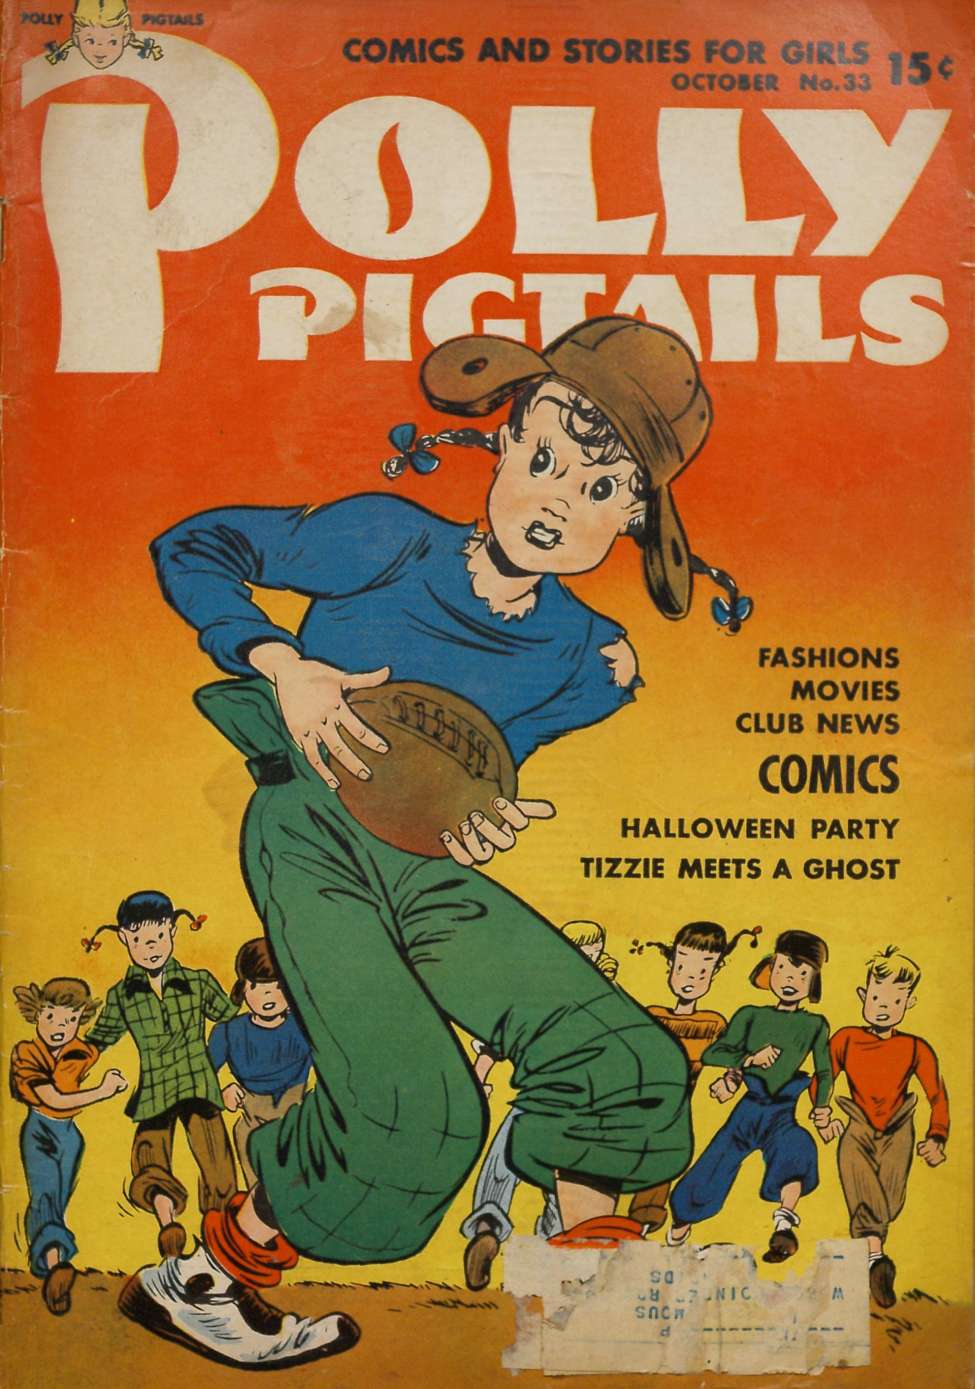 Book Cover For Polly Pigtails 33